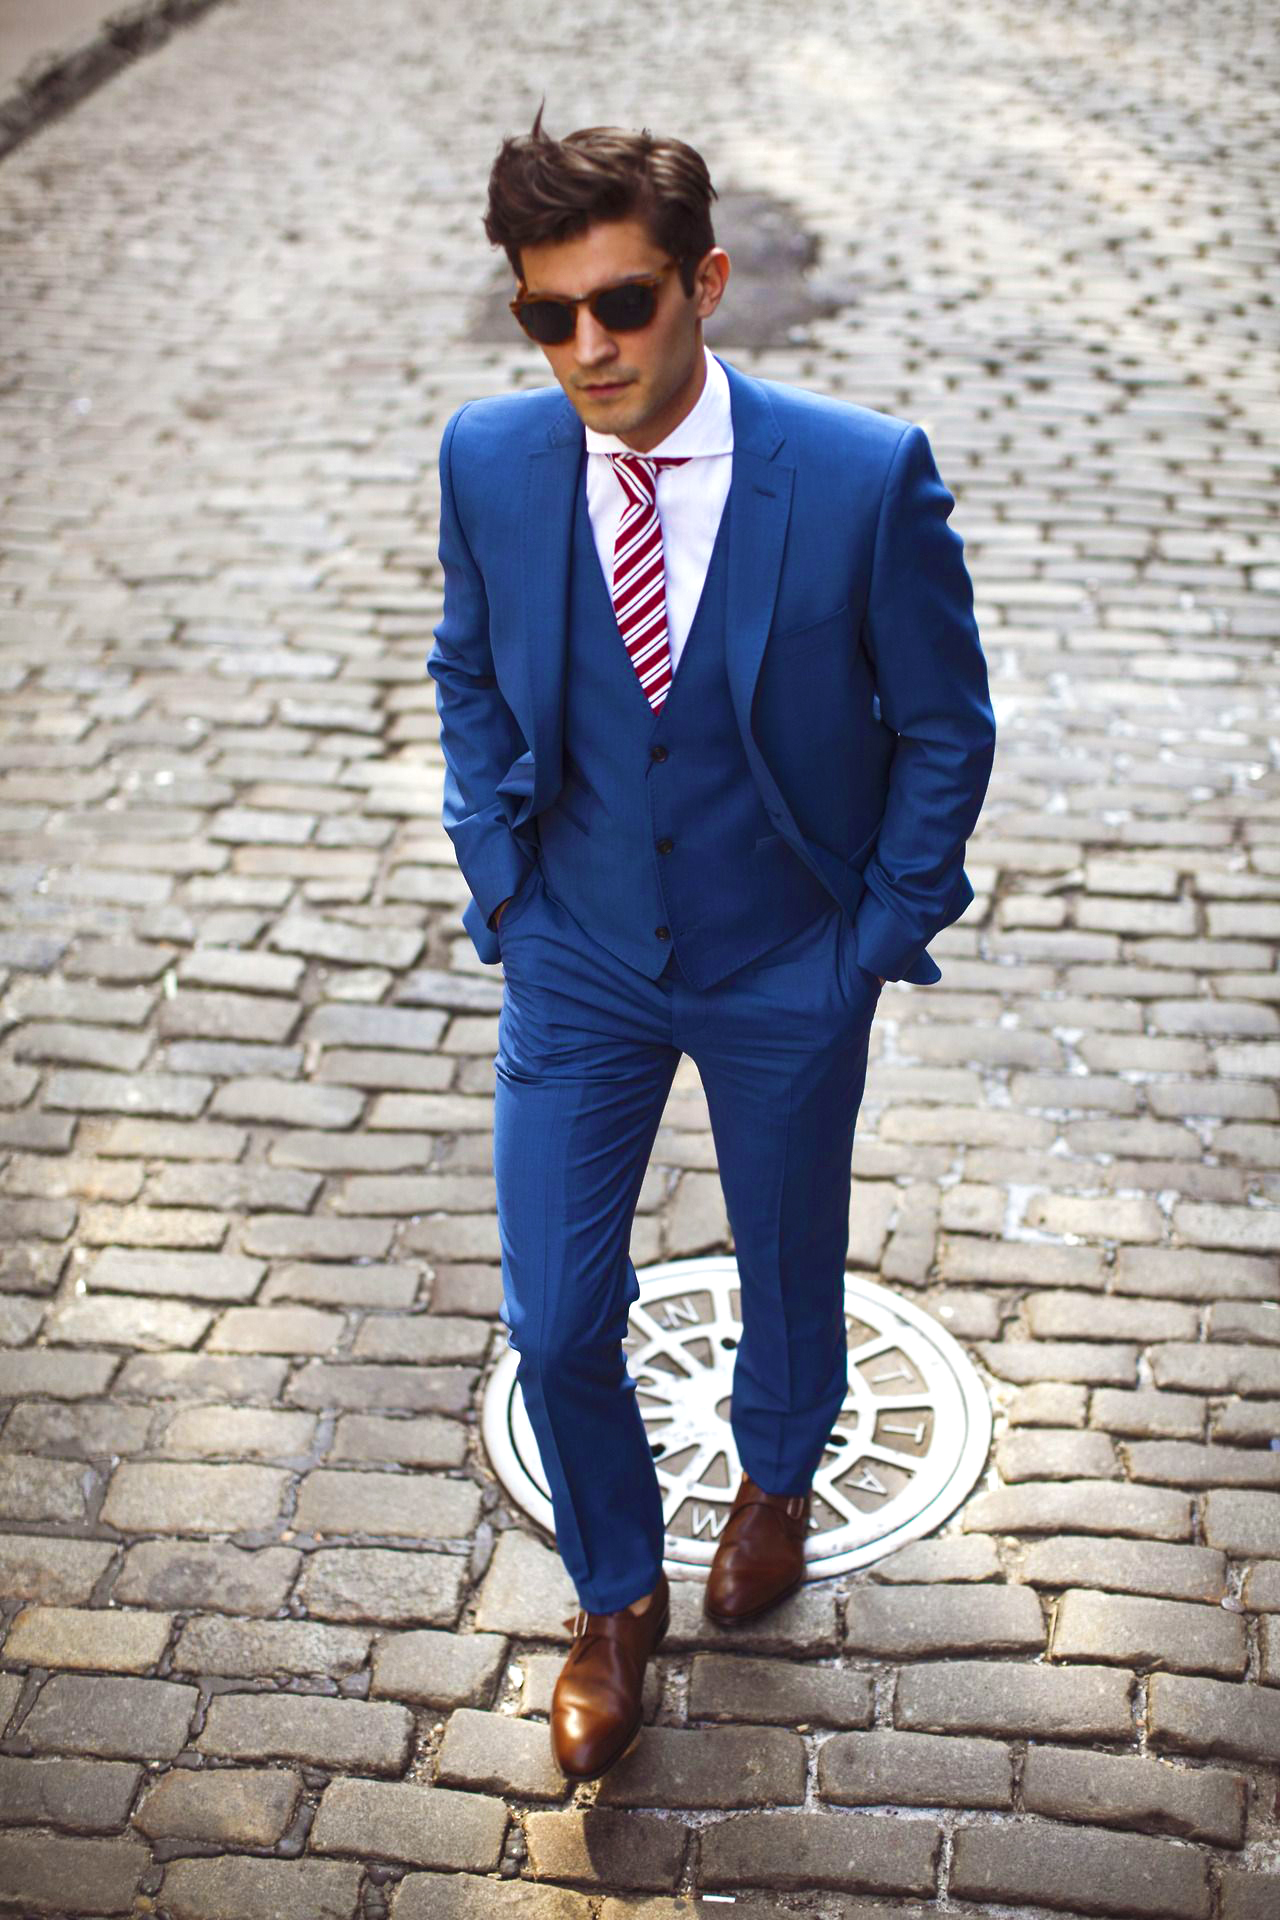 Perfect blue suit with a shirt and tie color combination